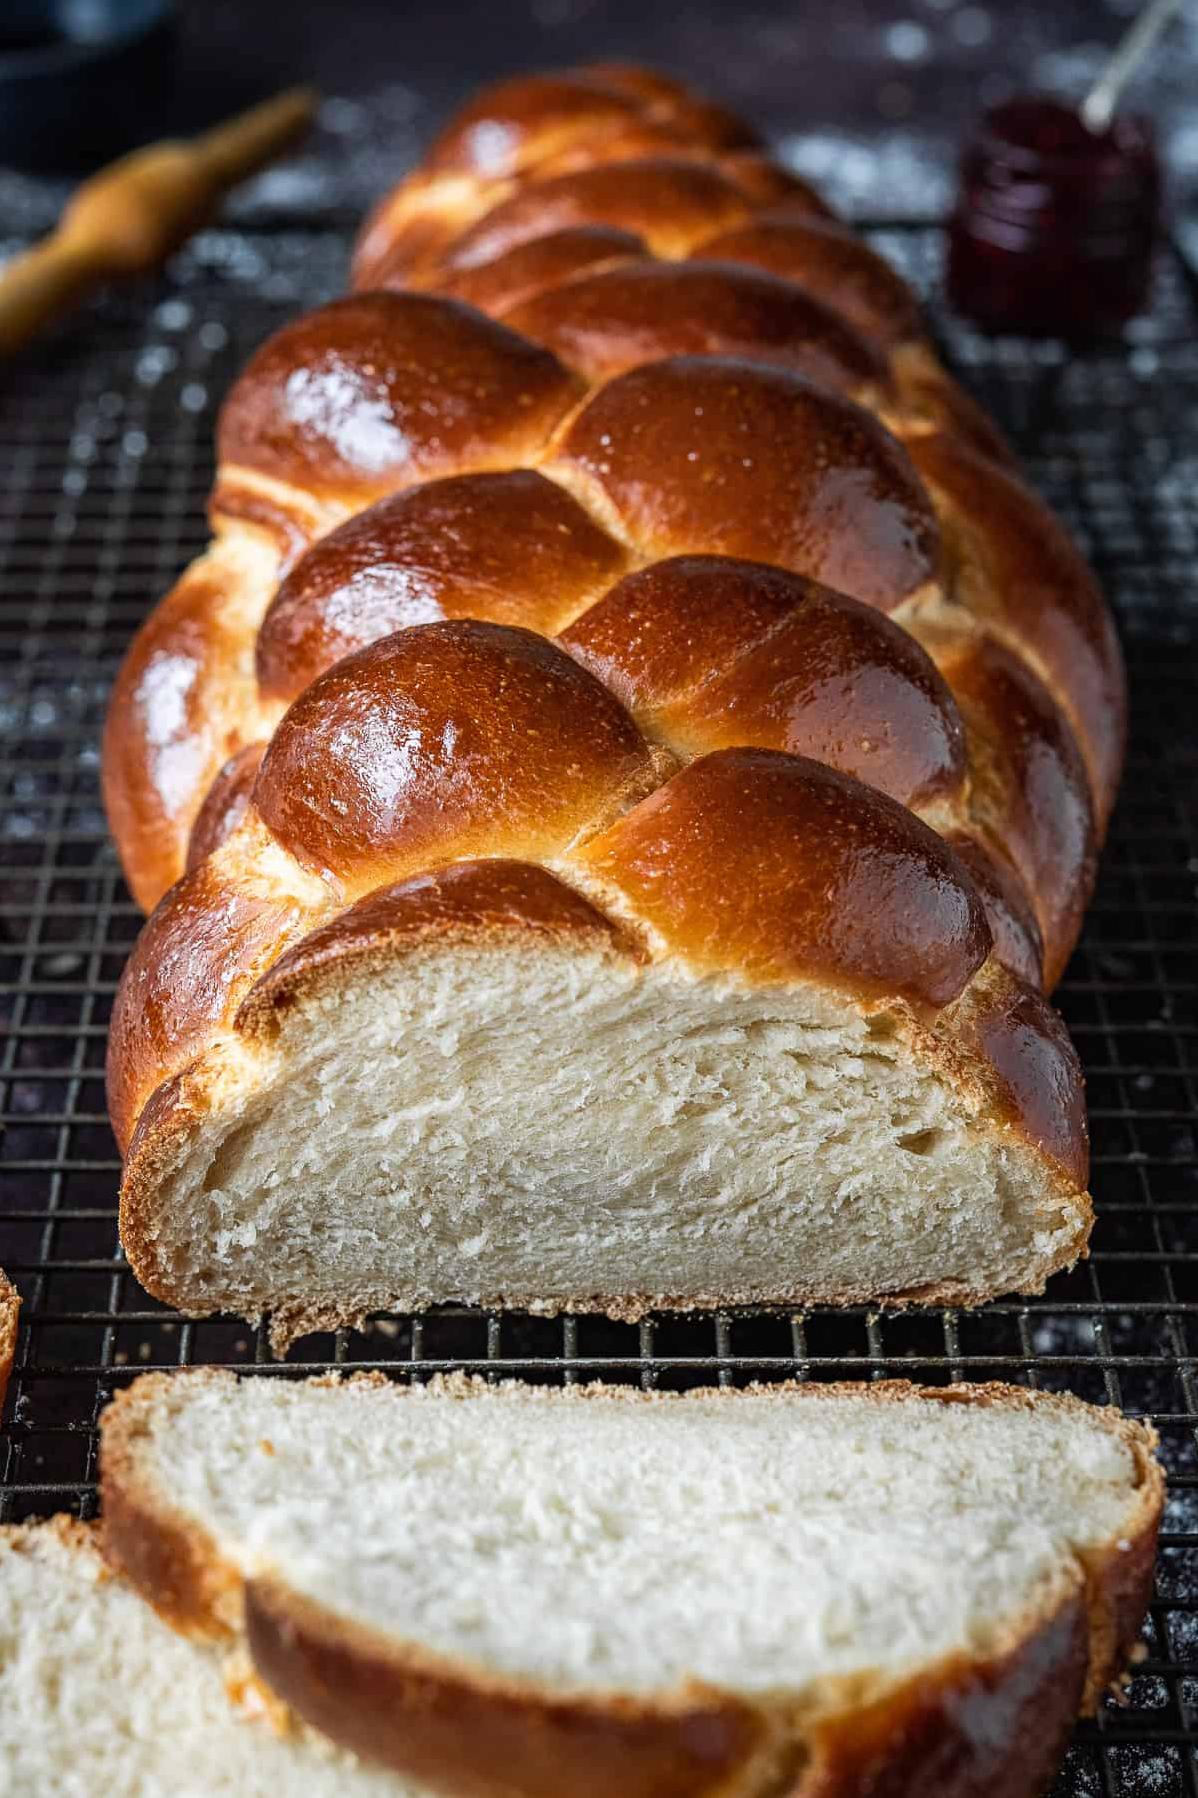  The aroma of freshly baked bread fills the air as the challah bakes to perfection.